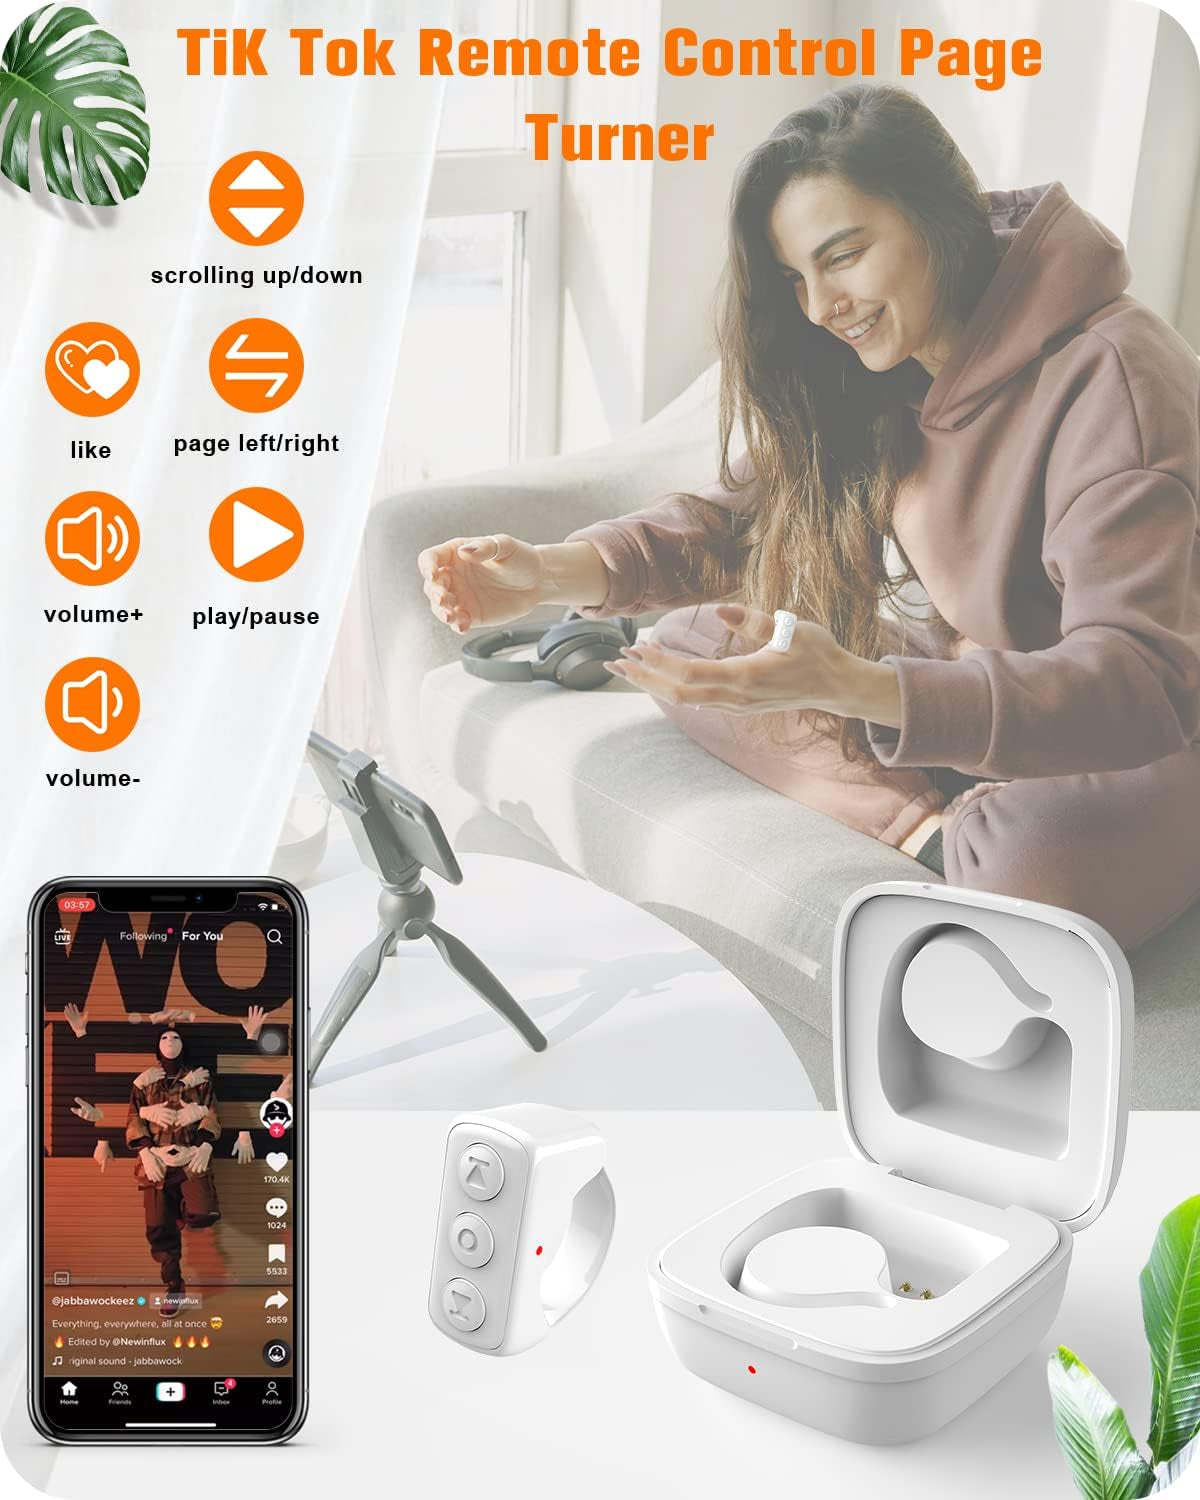 Tiktok Remote Control Kindle App Page Turner, Bluetooth Camera Video Recording Remote, TIK Tok Scrolling Ring for Iphone, Ipad, Ios, Android - White